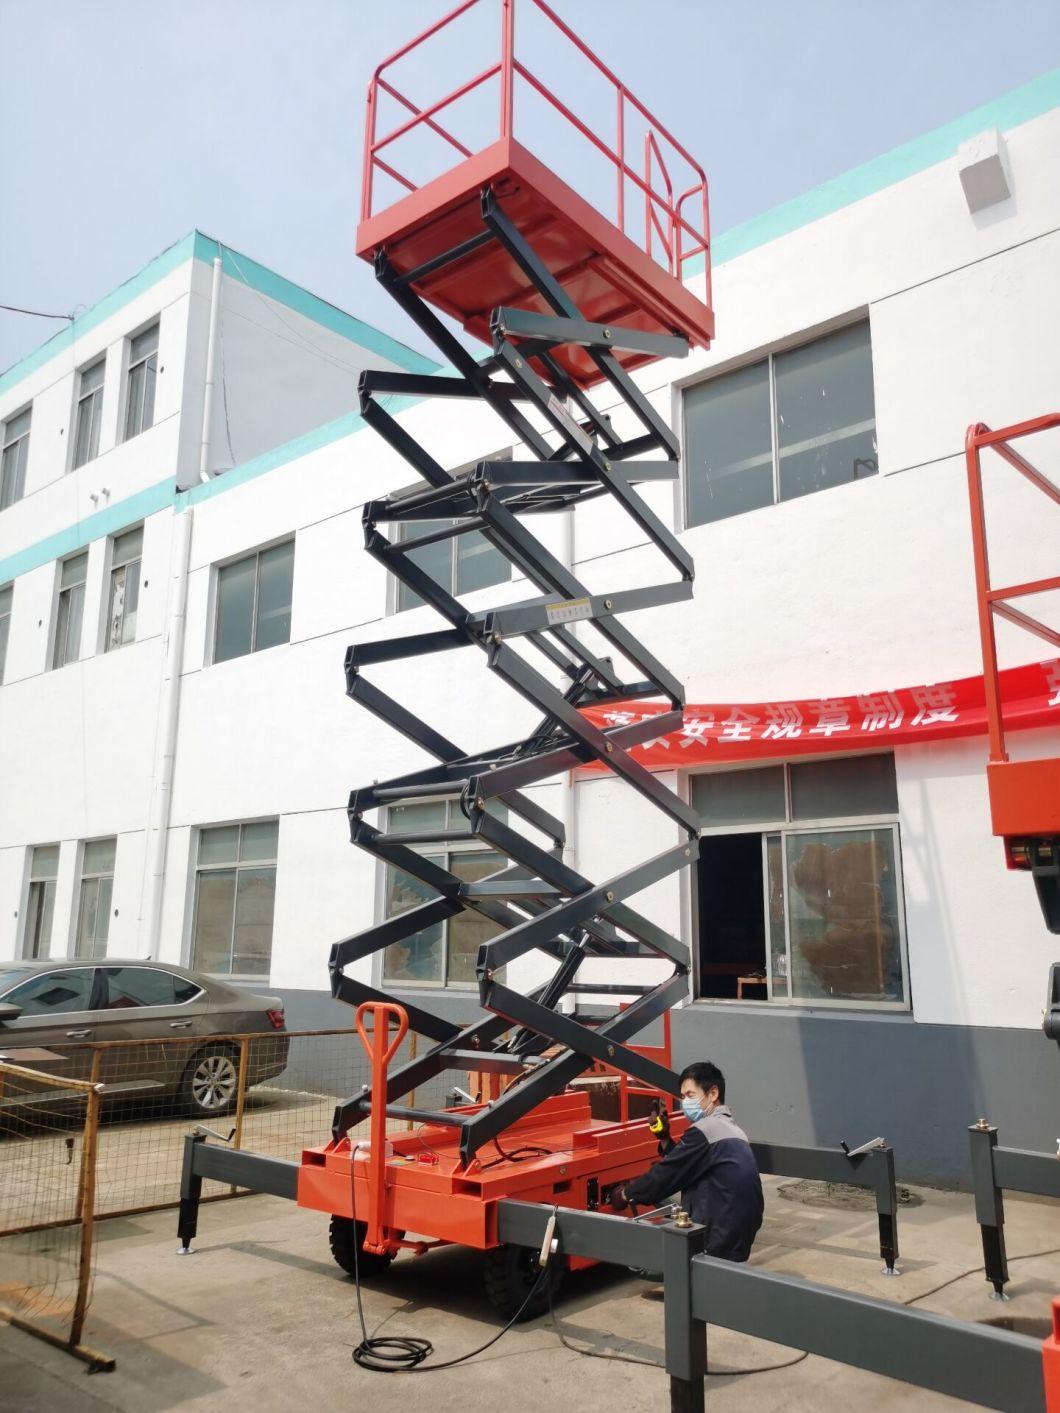 Daxlifter Brand Portable Manual Mobile Scissor Lift with CE